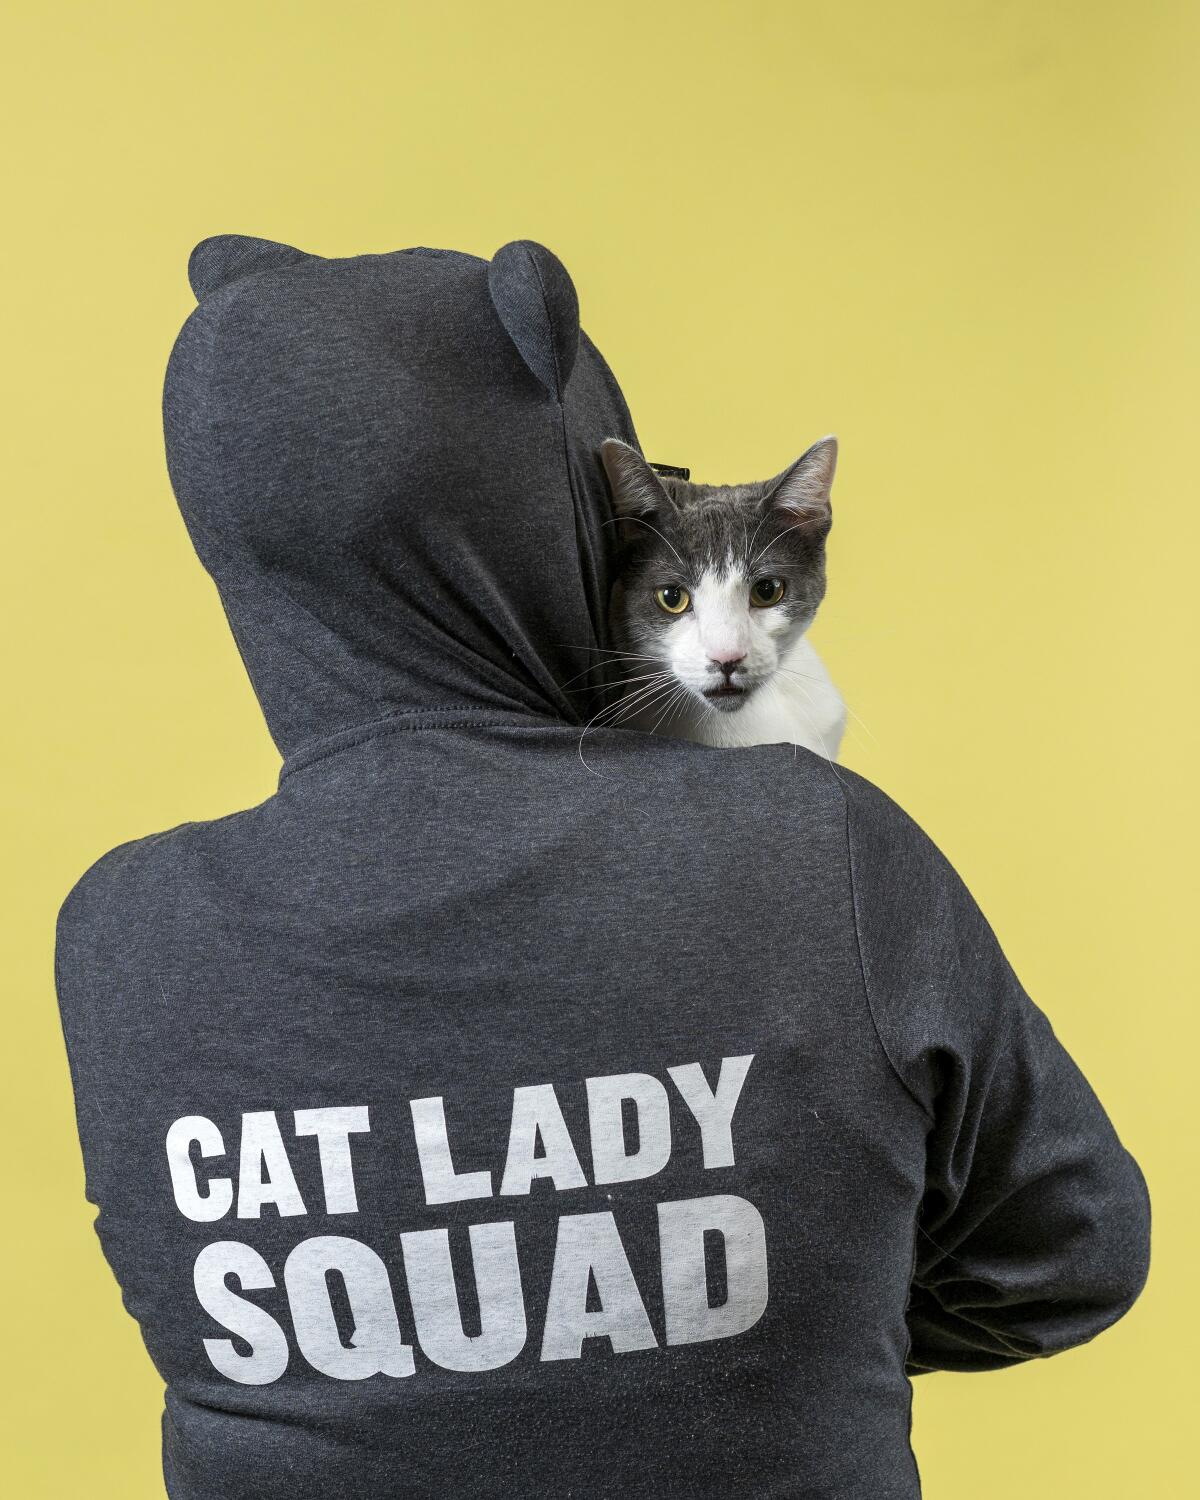 Stoffel the cat looks over the shoulder of Esther Su, who is wearing a hoodie that says "Cat Lady Squad."